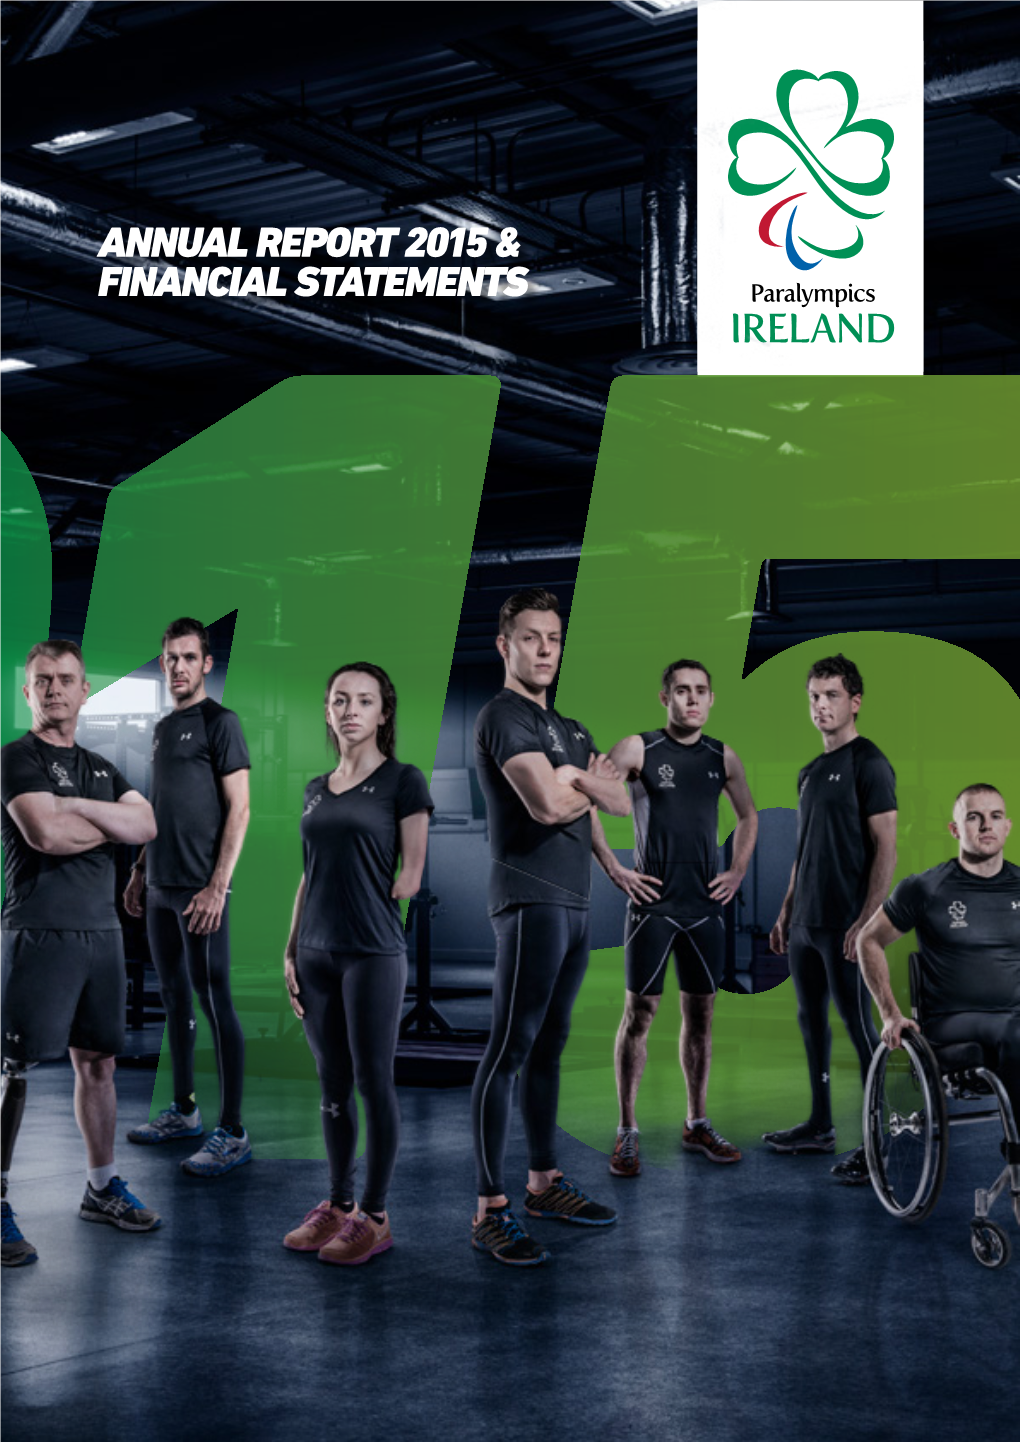 Annual Report 2015 & Financial Statements